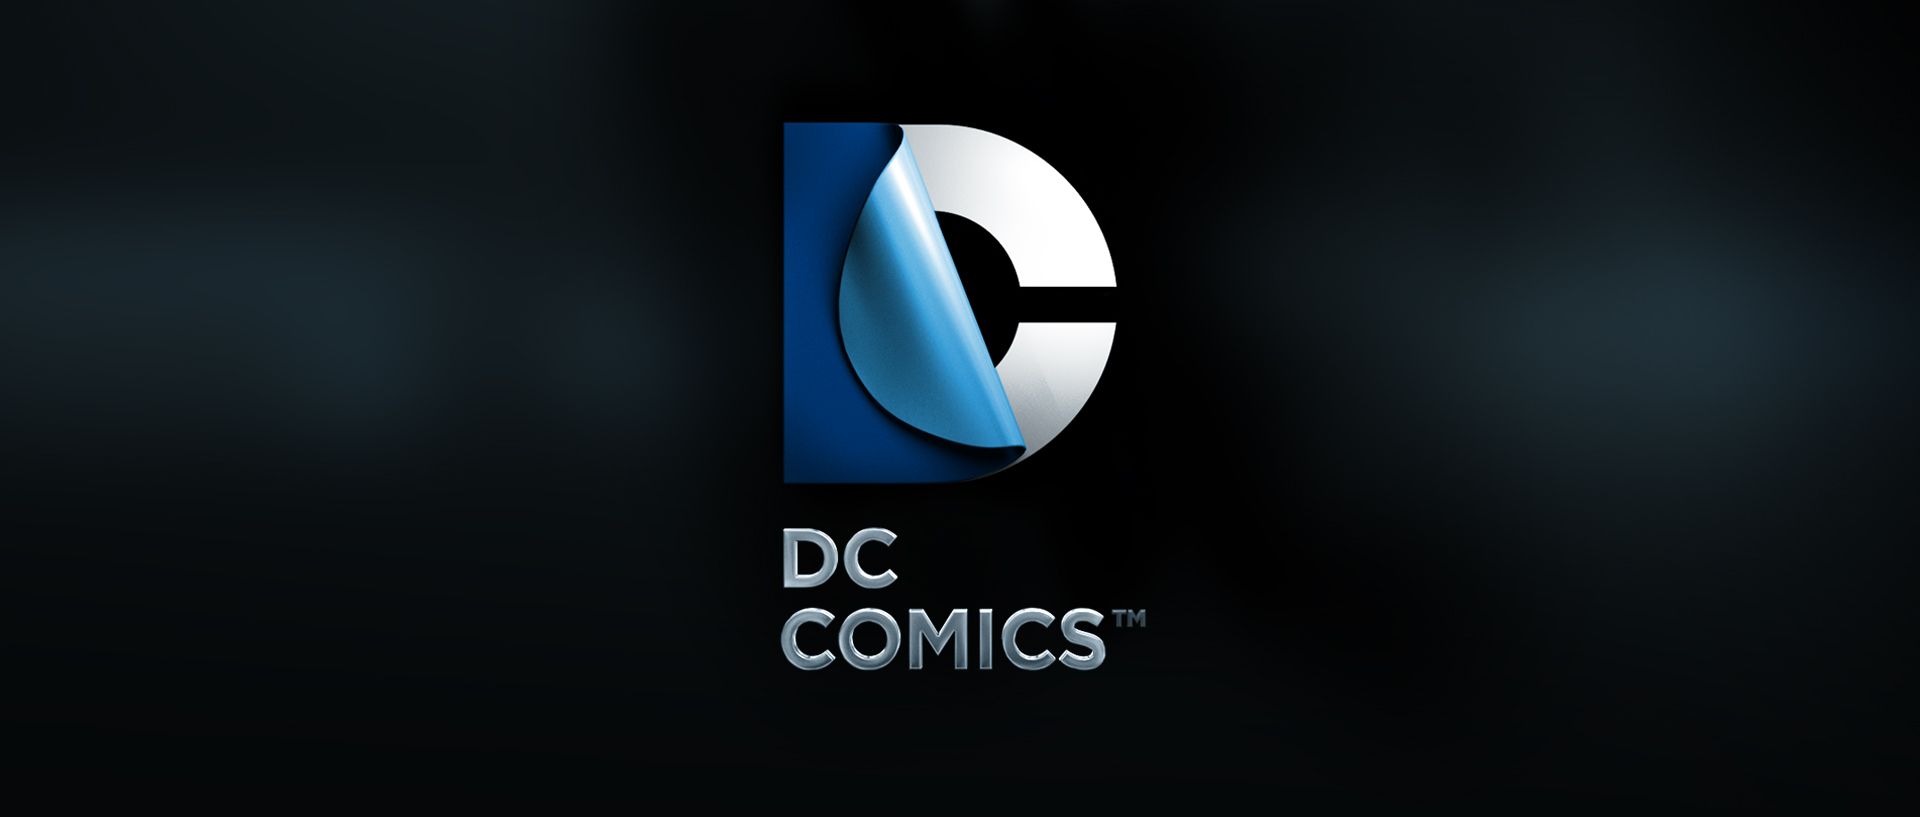 170 DC Comics HD Wallpapers Backgrounds - Wallpaper Abyss